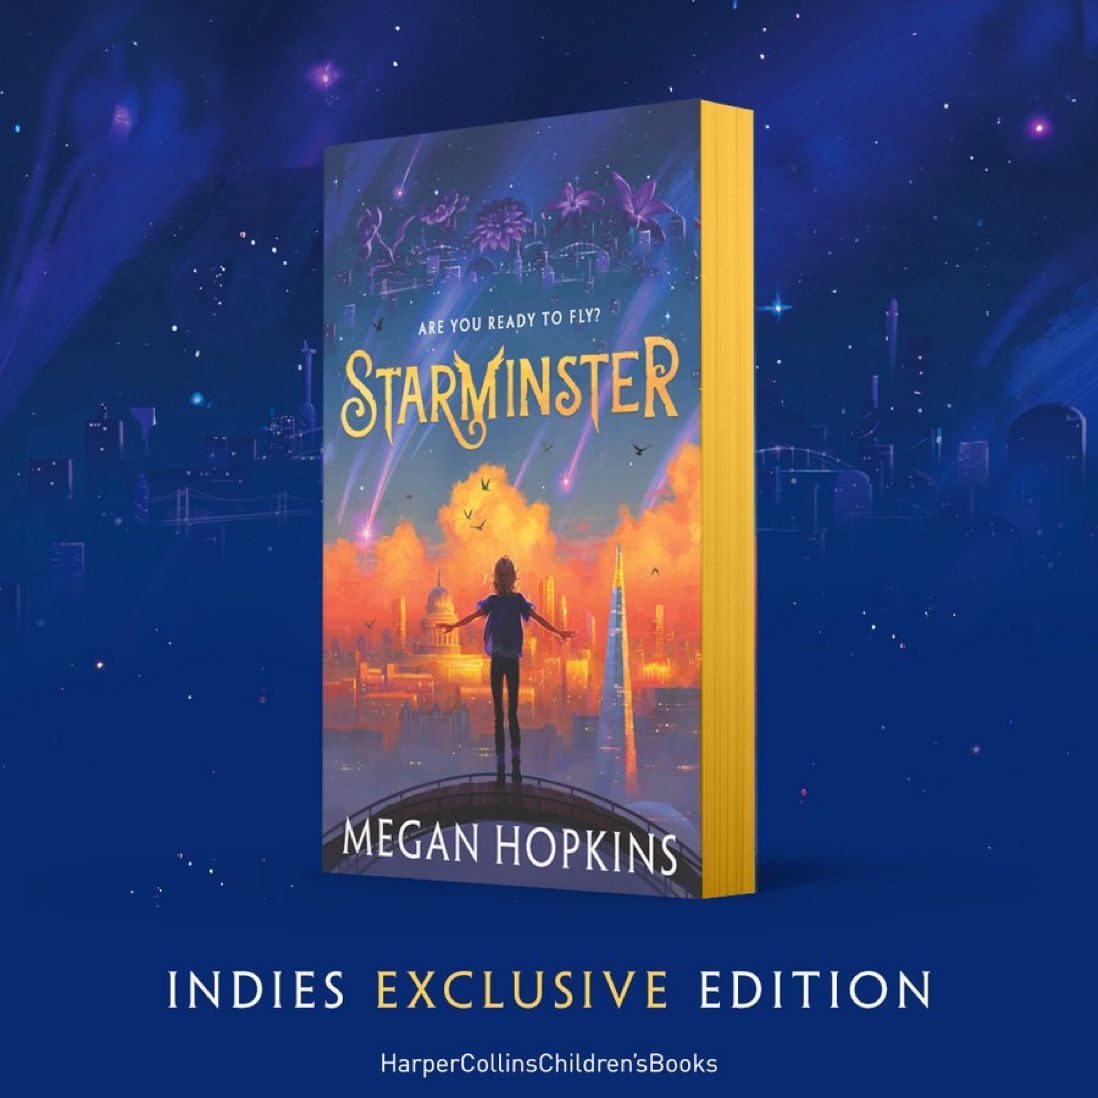 #preorder the Indies Exclusive Edition of STARMISTER by @meganrkhopkins 
Take flight on this beautifully-written, epic and soaring new adventure.

@HarperCollinsCh #ChooseBookshops

quokkabookstore.co.uk/product/starmi…